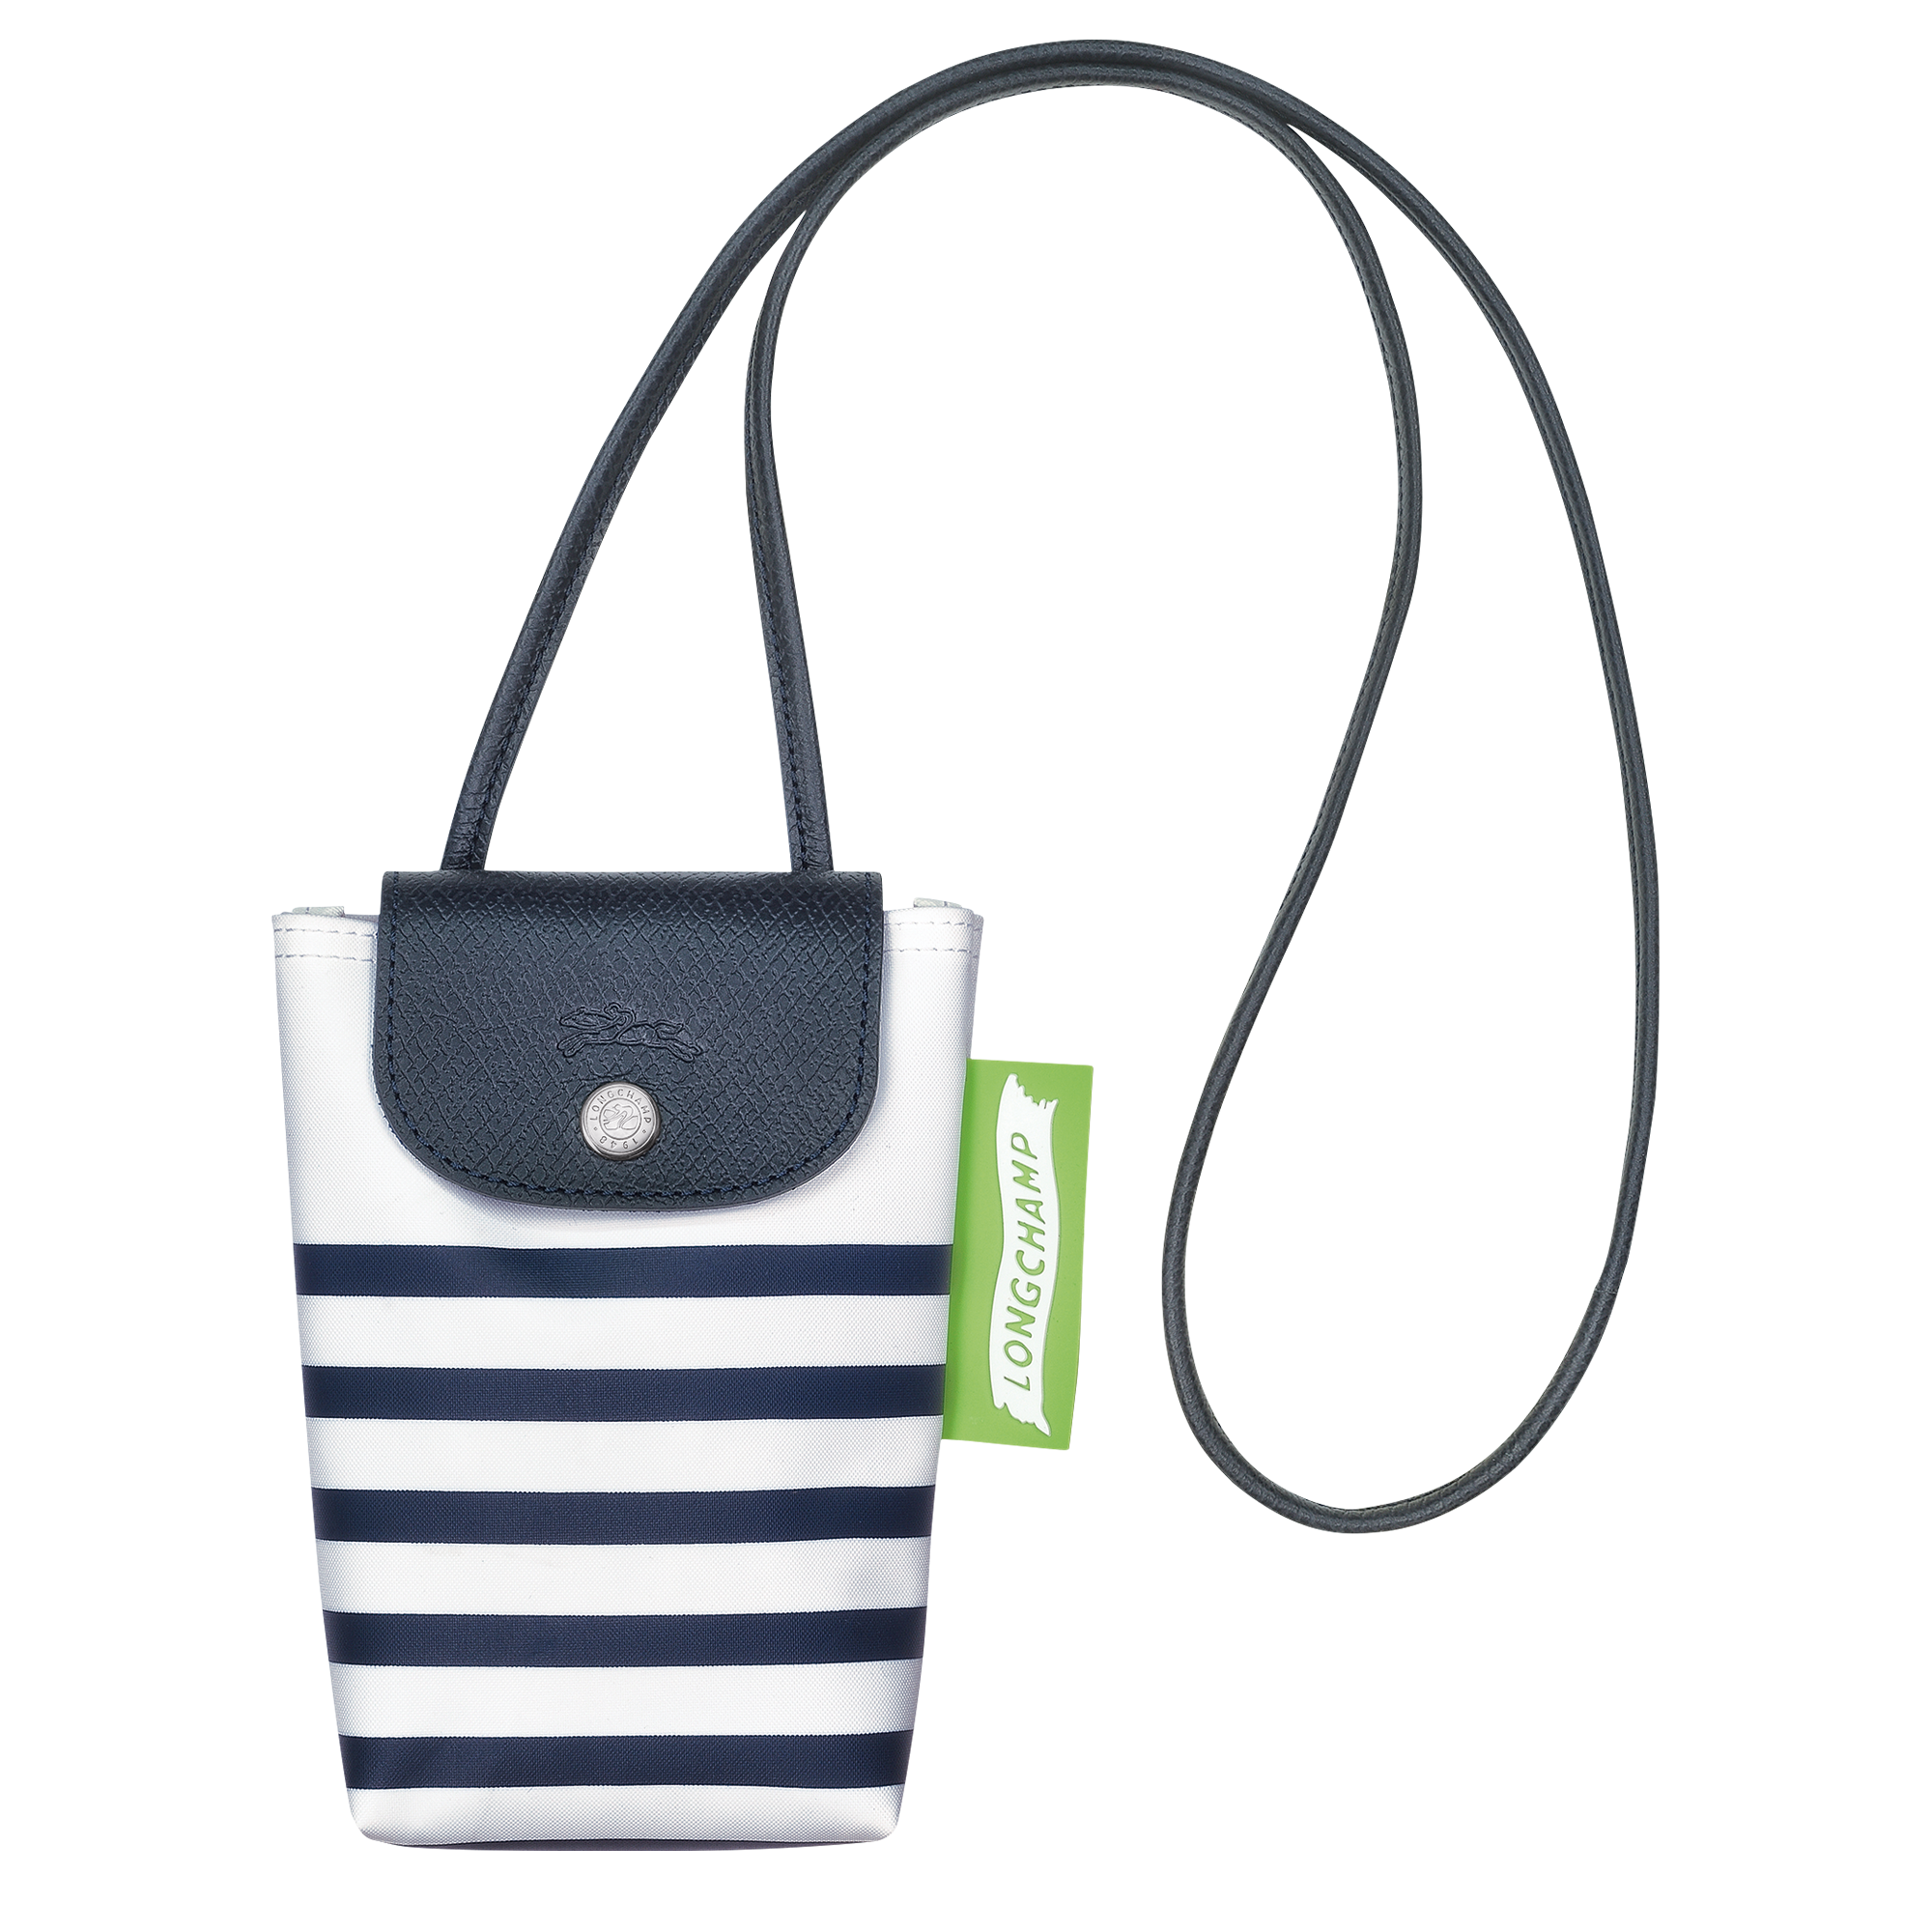 Longchamp LE PLIAGE COLLECTION - Phone case in Navy/White - 1 (SKU: 34201HDF165)